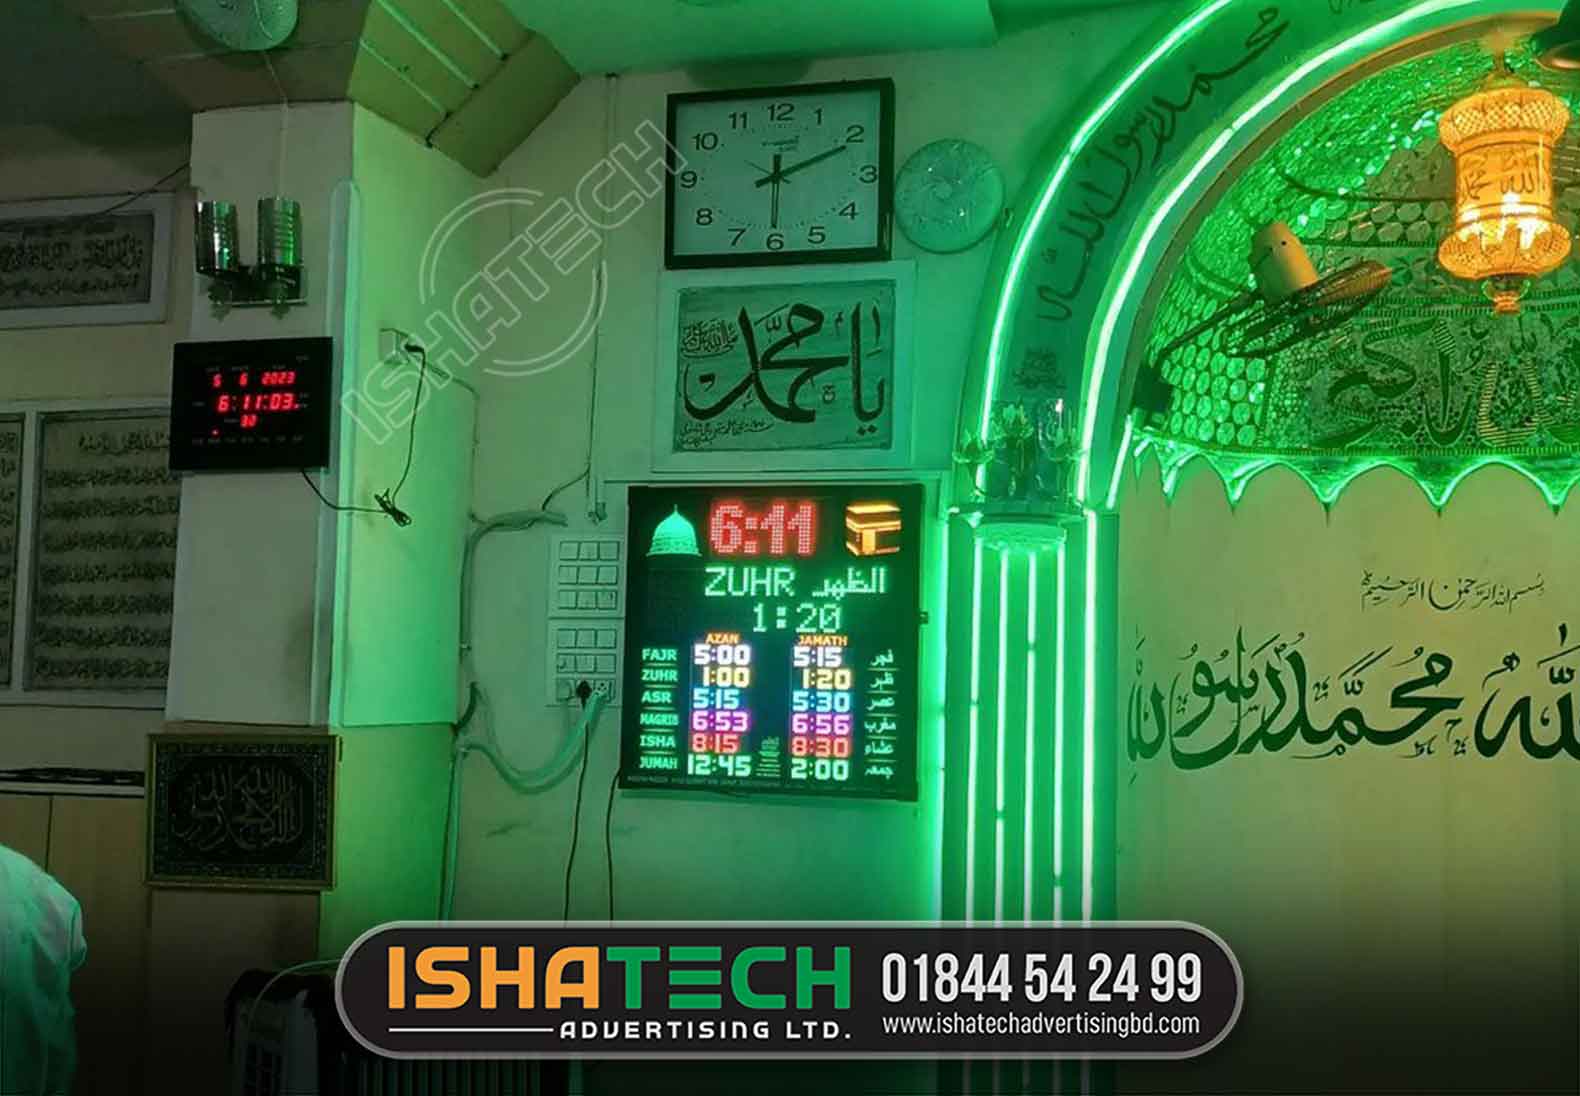 Designed with LED technology, this mosque digital azan clock offers clear visibility, ensuring accurate timekeeping and prayer reminders.